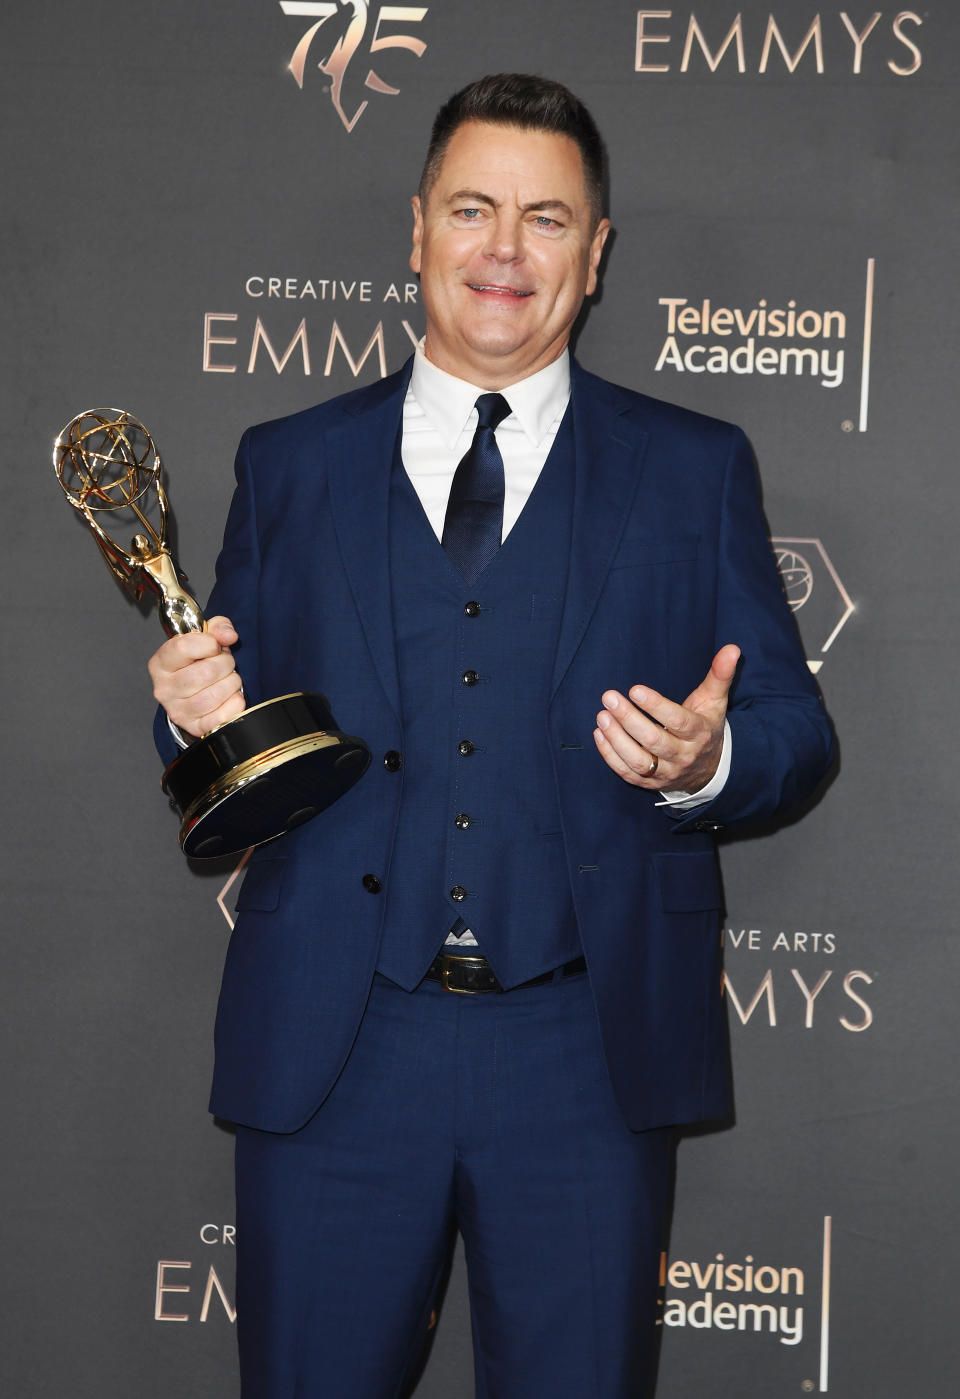 Nick Offerman at the 75th Creative Arts Emmy Awards held at the Peacock Theater at L.A. Live on January 6, 2023 in Los Angeles, California. (Photo by JC Olivera/Variety via Getty Images)